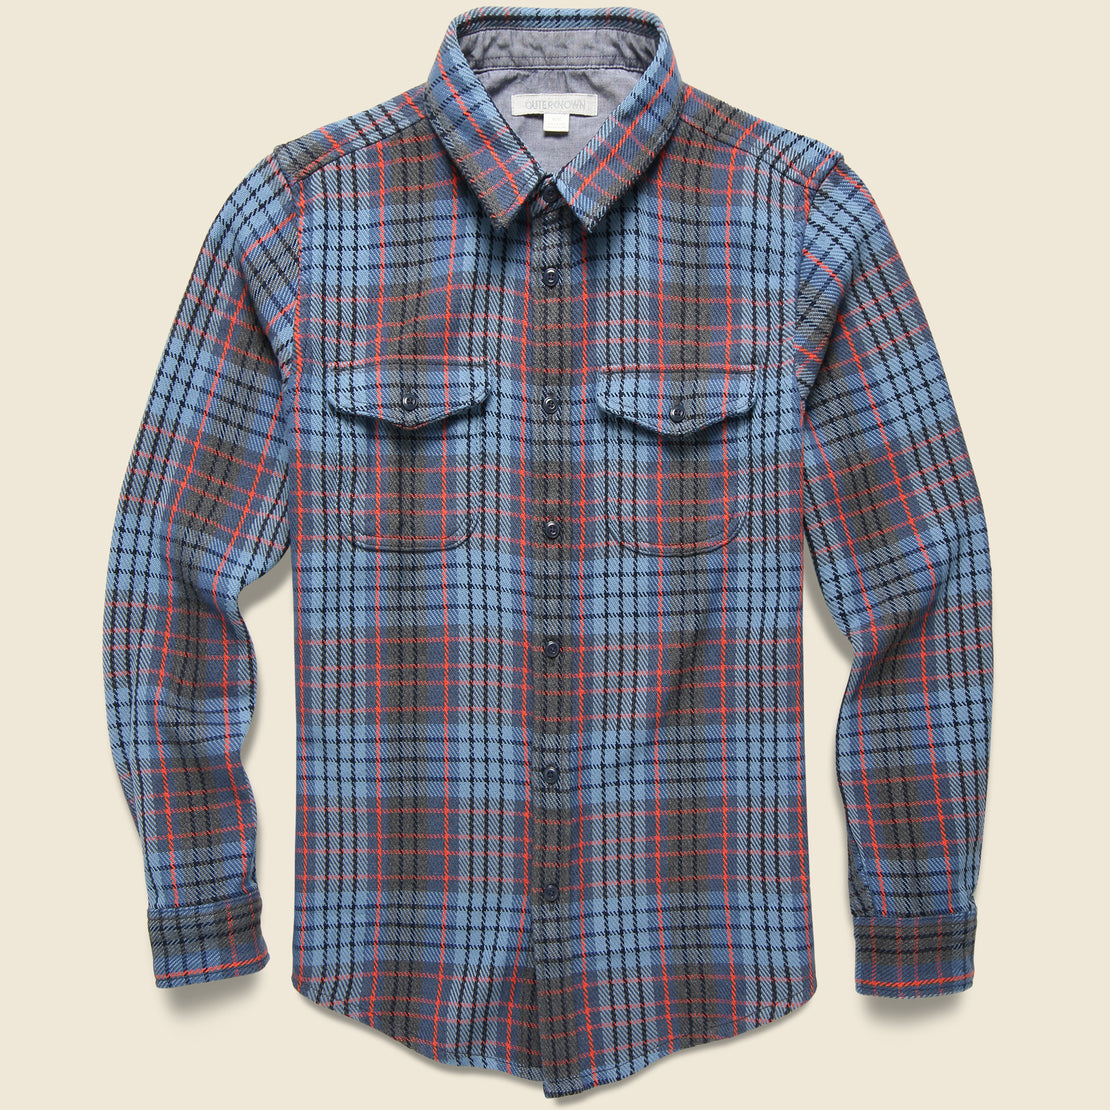 Outerknown Blanket Shirt - Pacific Old Coast Plaid